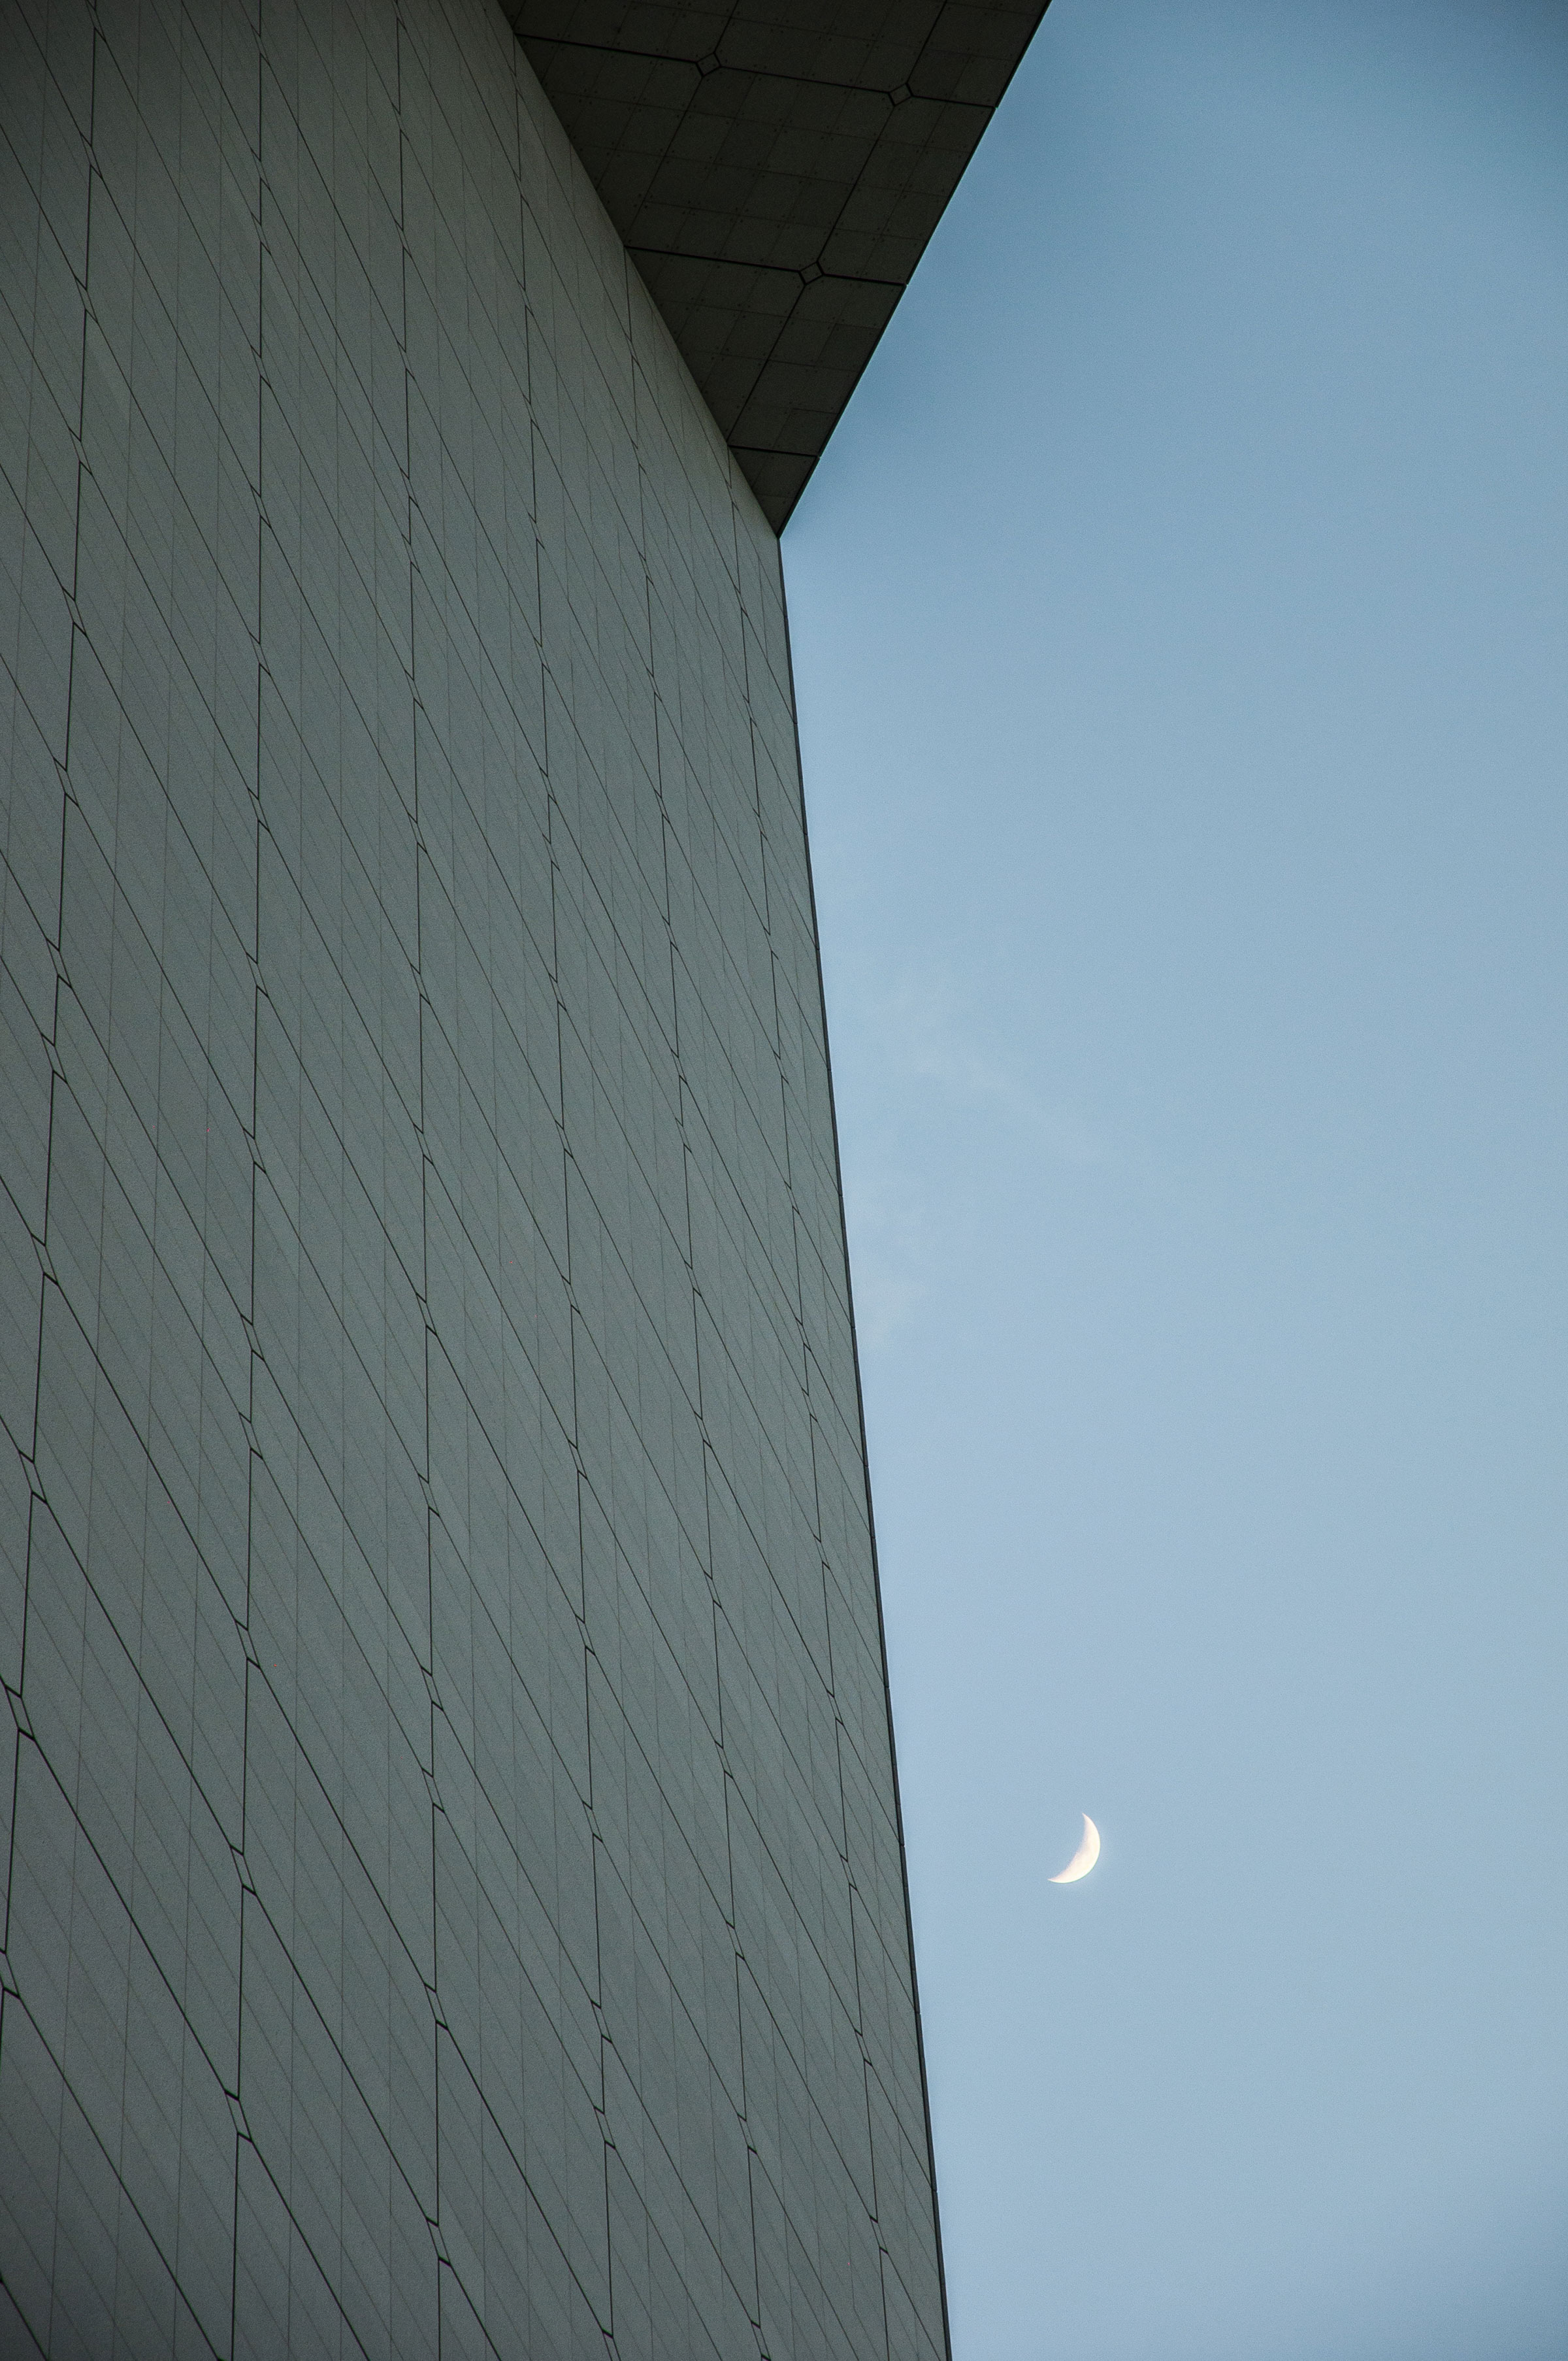 Abstract architecture photography with the moon and the top of the Arch of La Défense, Paris, France. (Nos Dren)